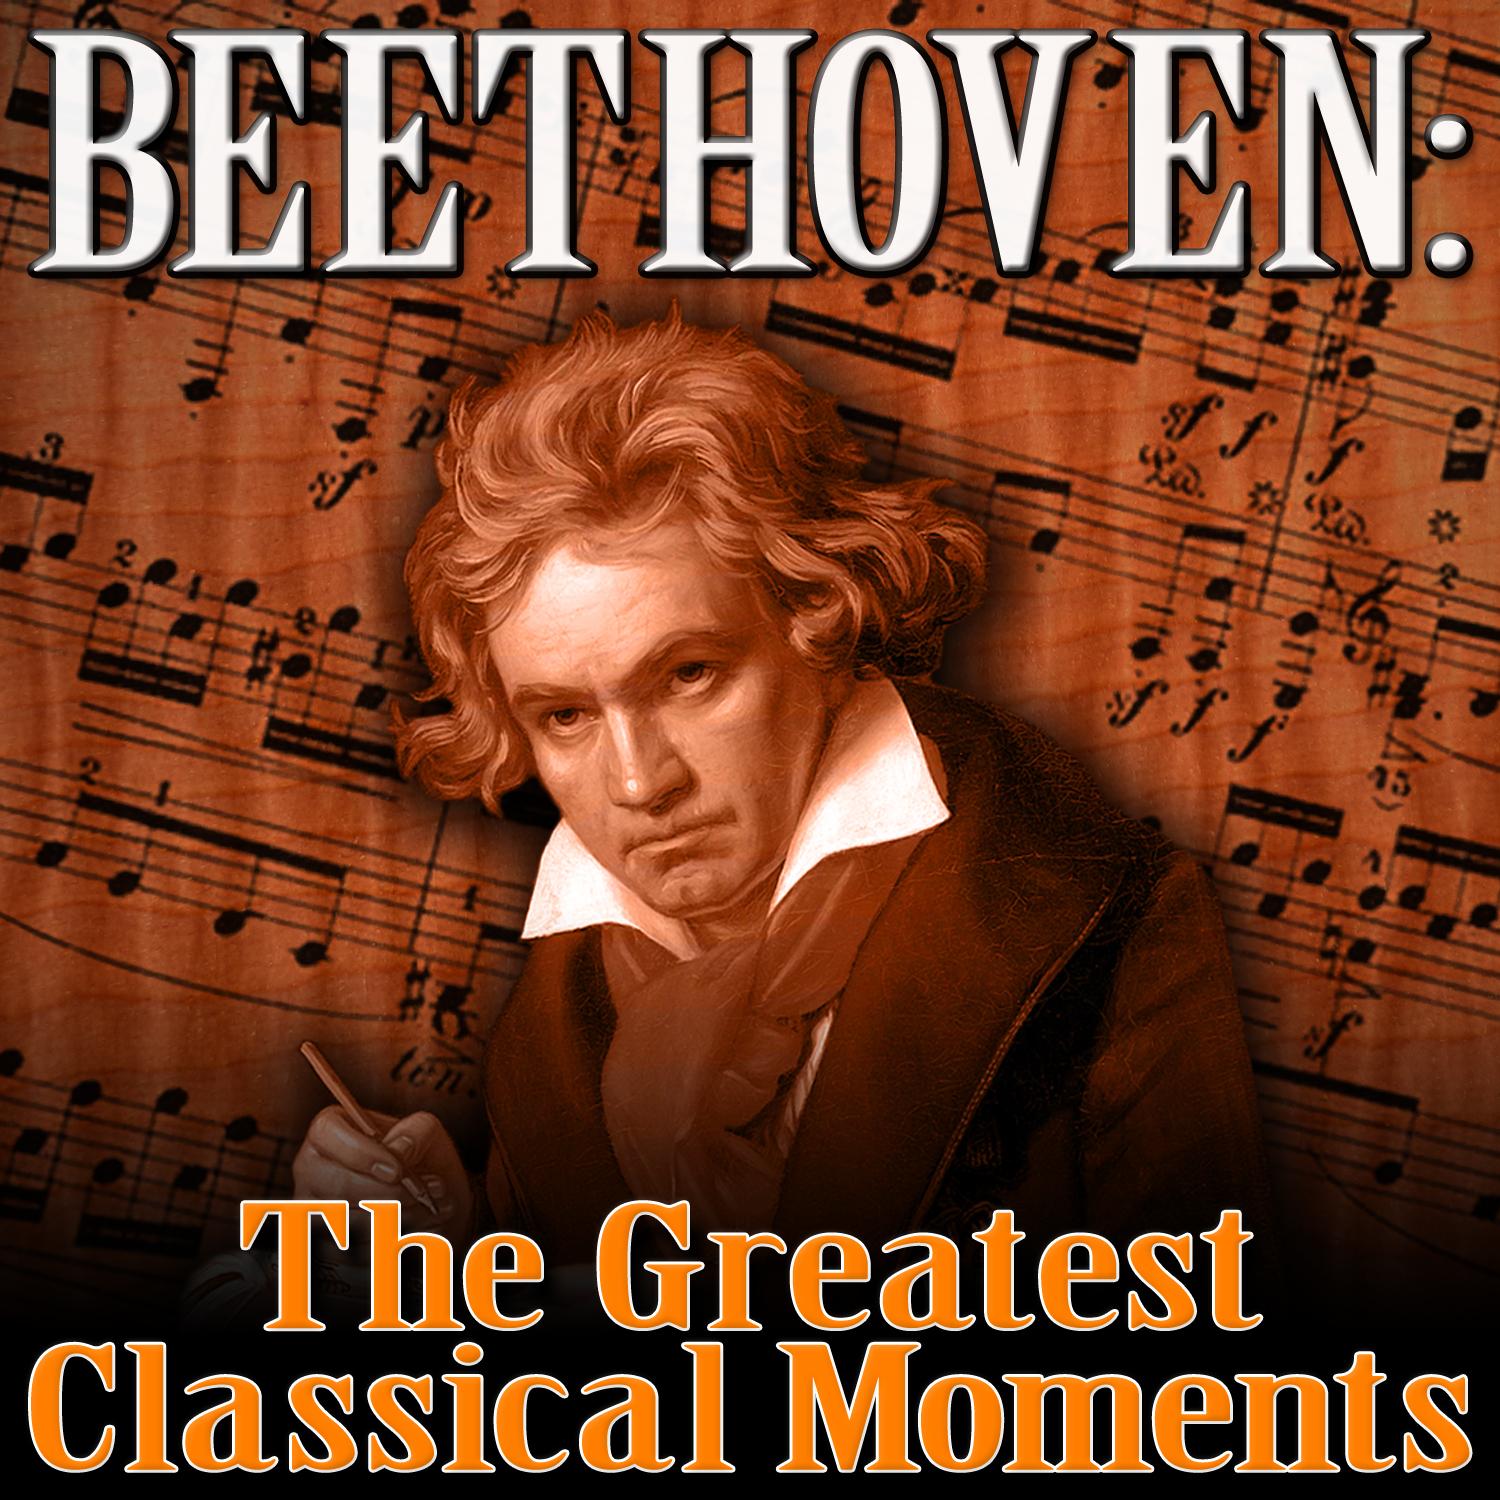 Beethoven: The Greatest Classical Moments